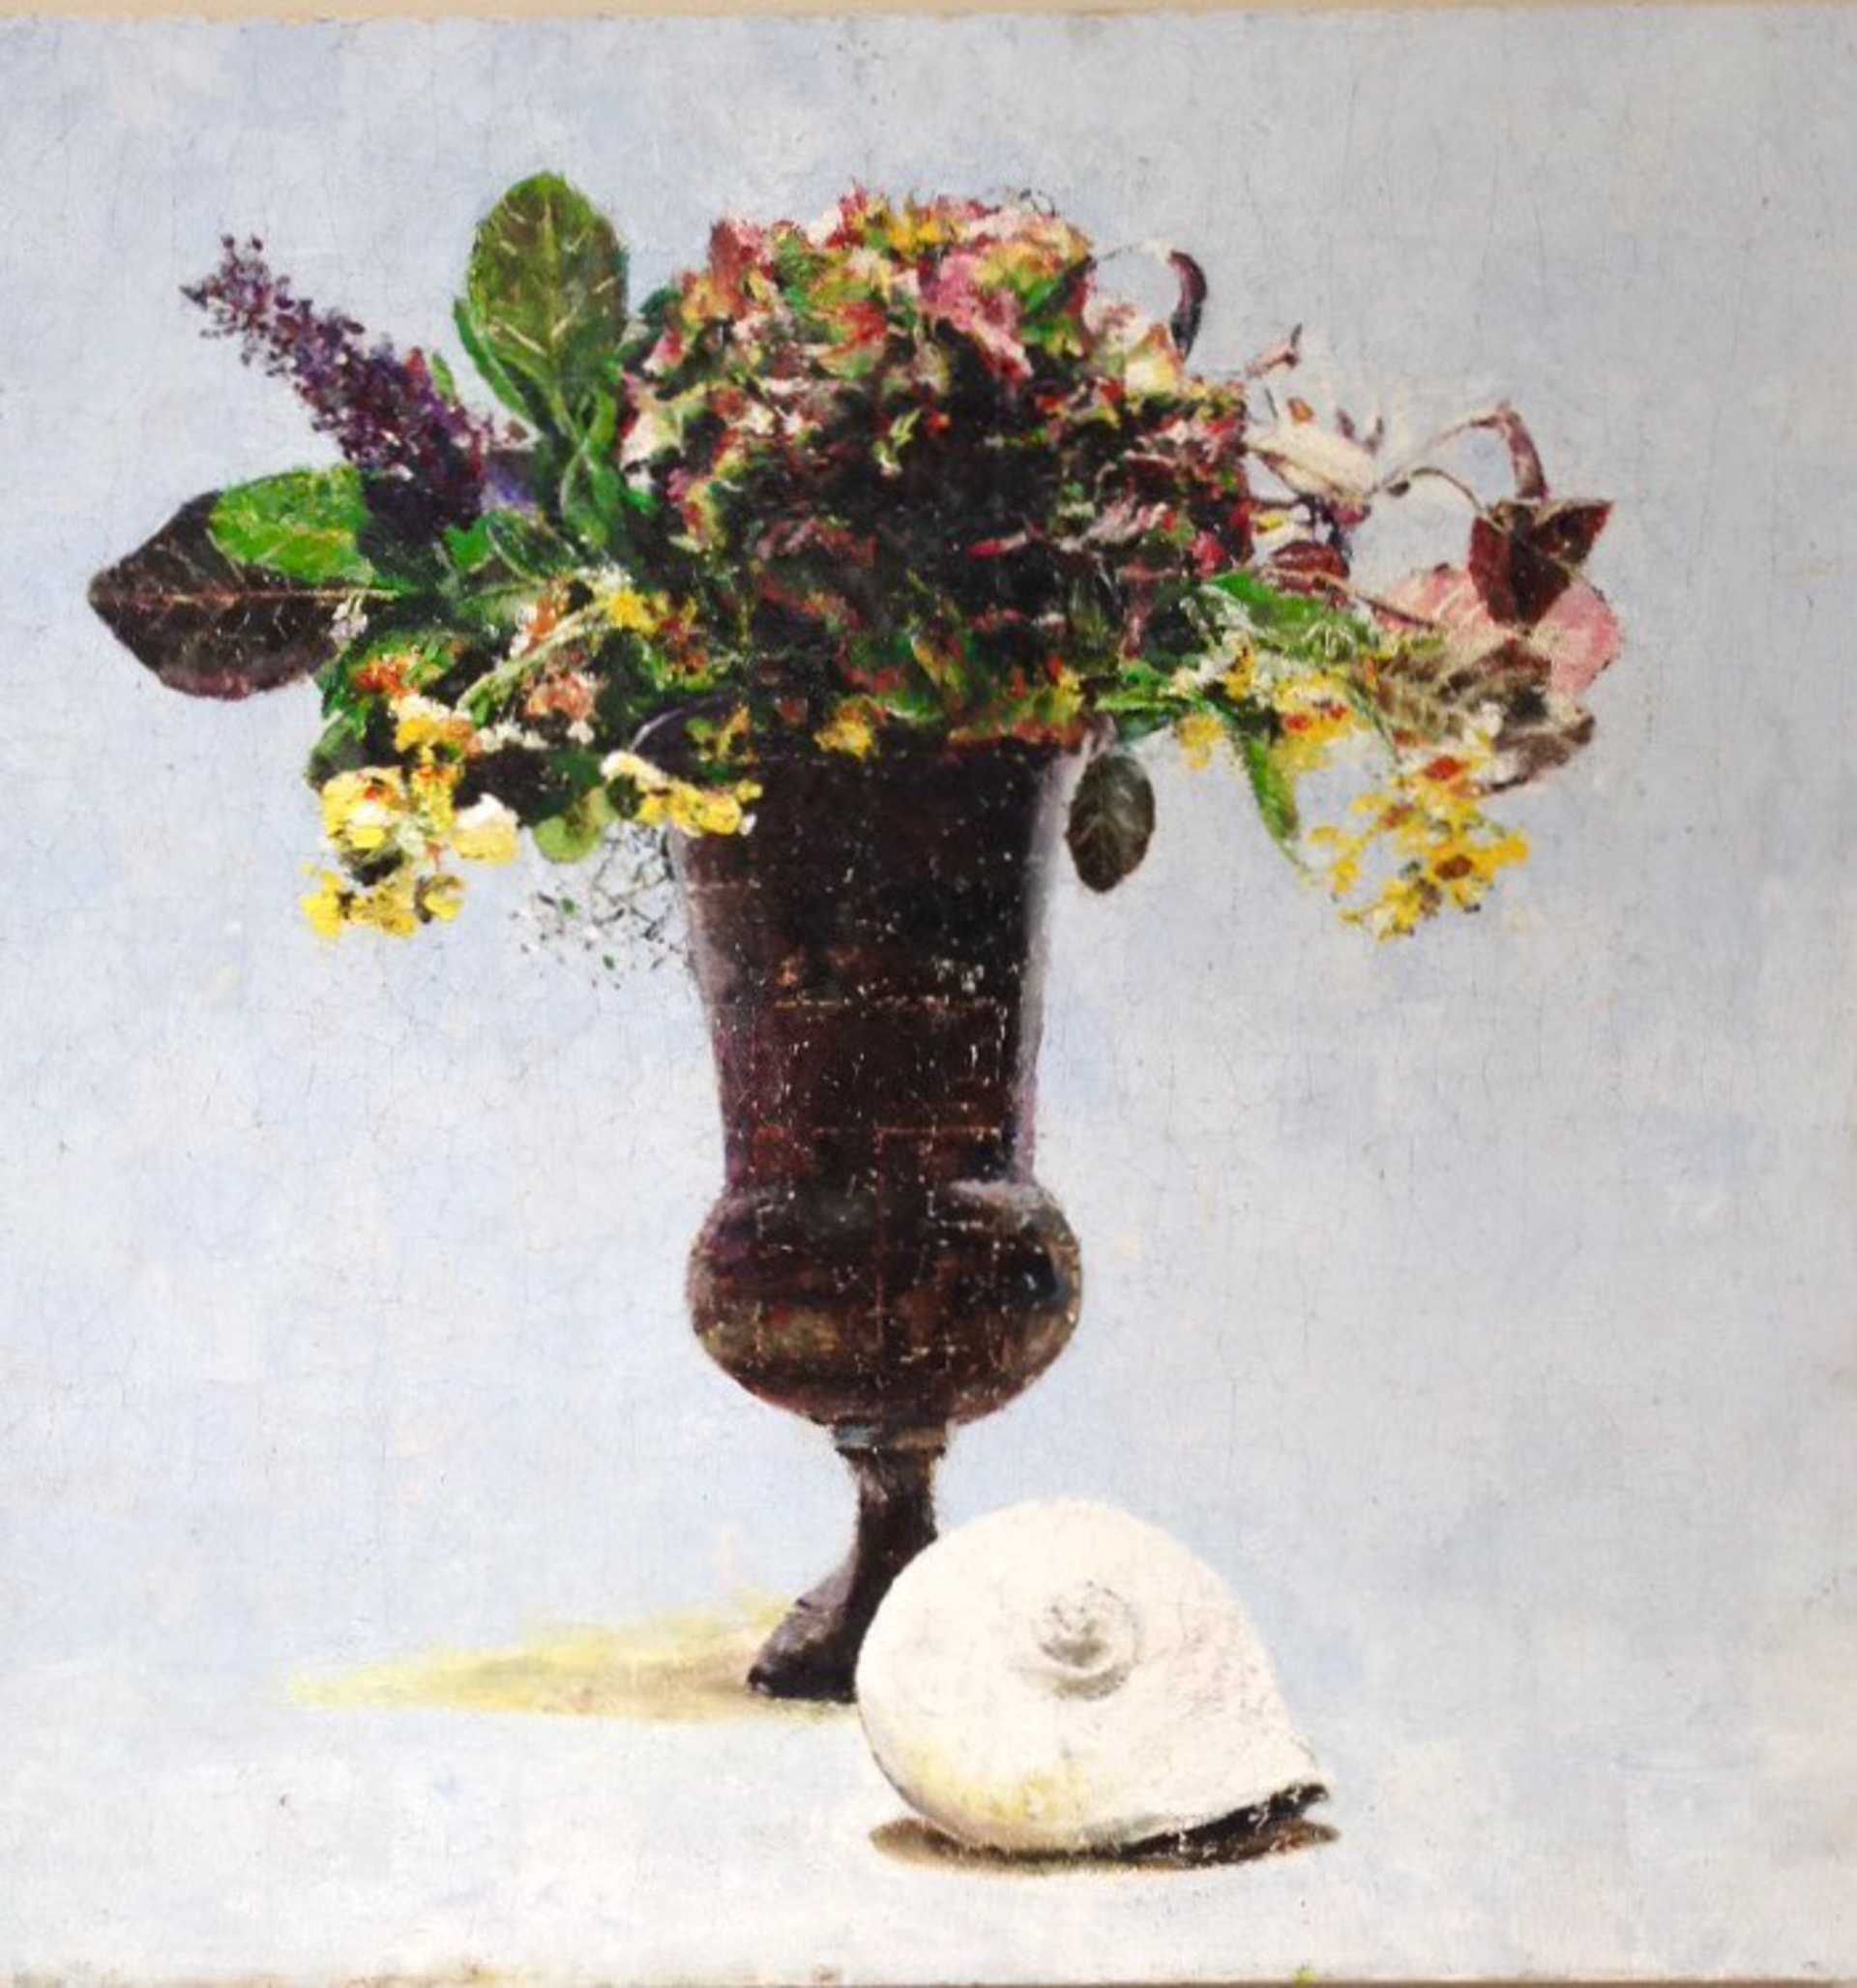 The Shell and Flowers by Mark Gaskin